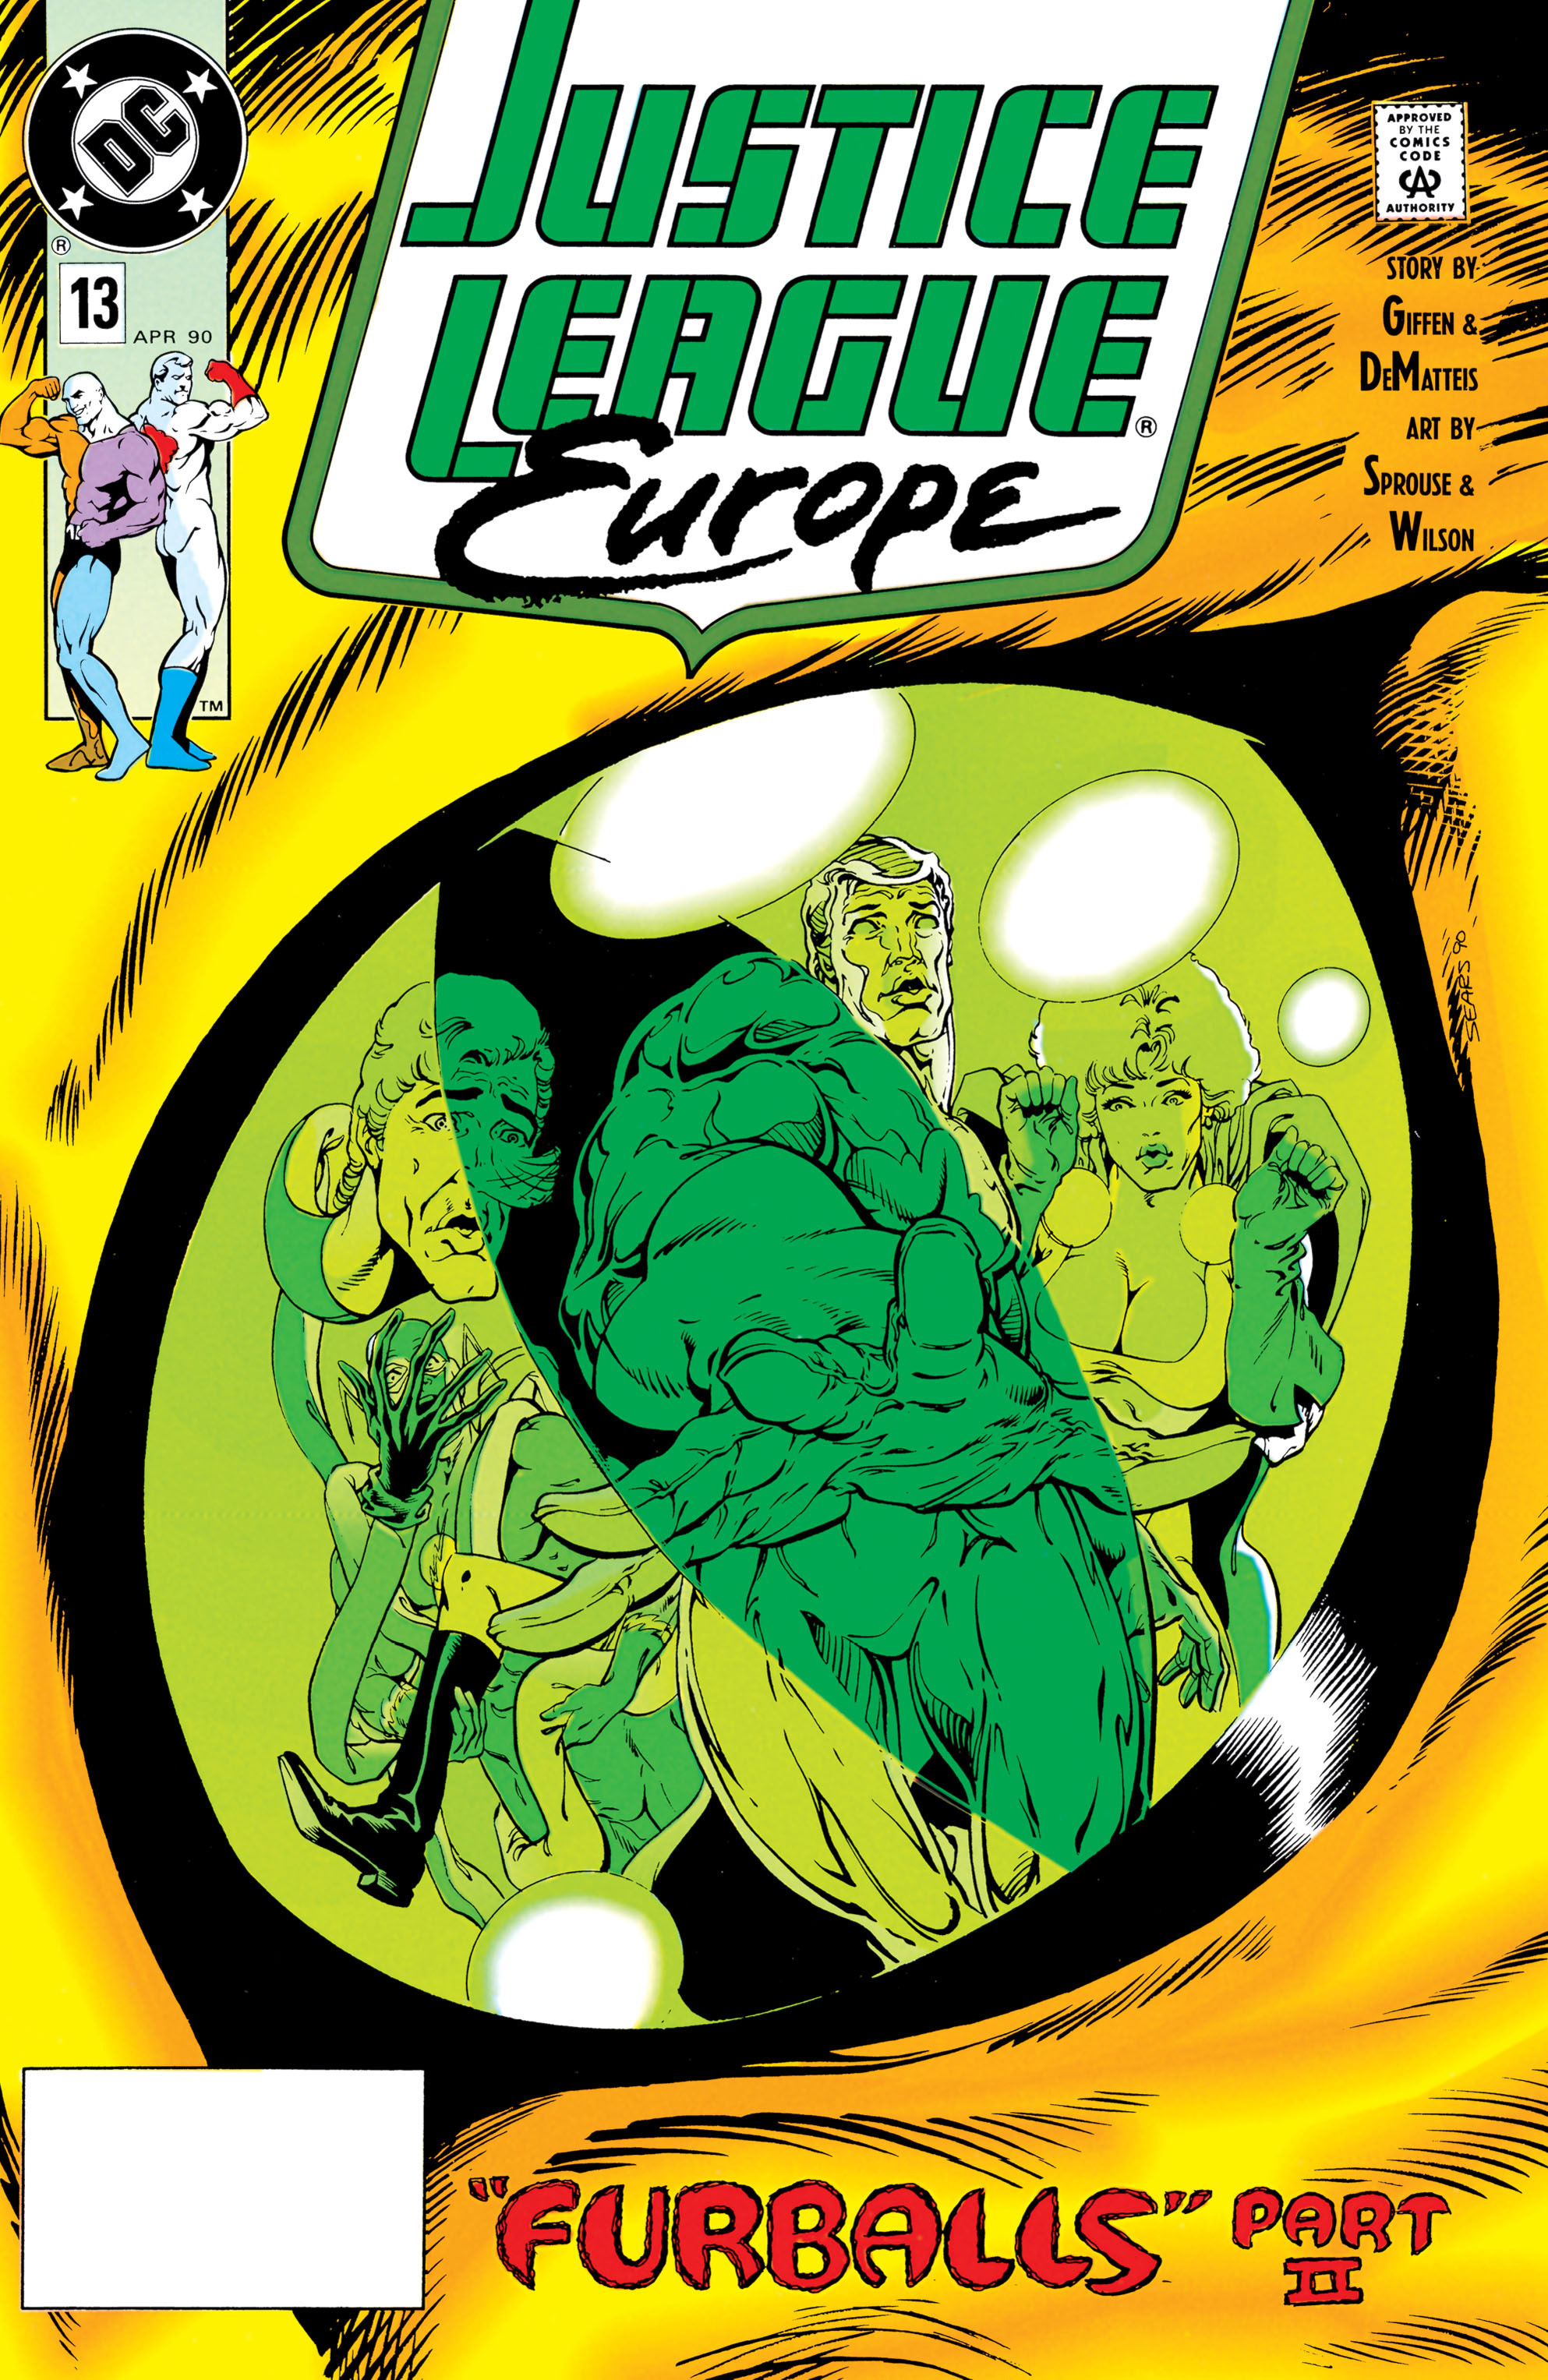 Read online Justice League Europe comic -  Issue #13 - 1